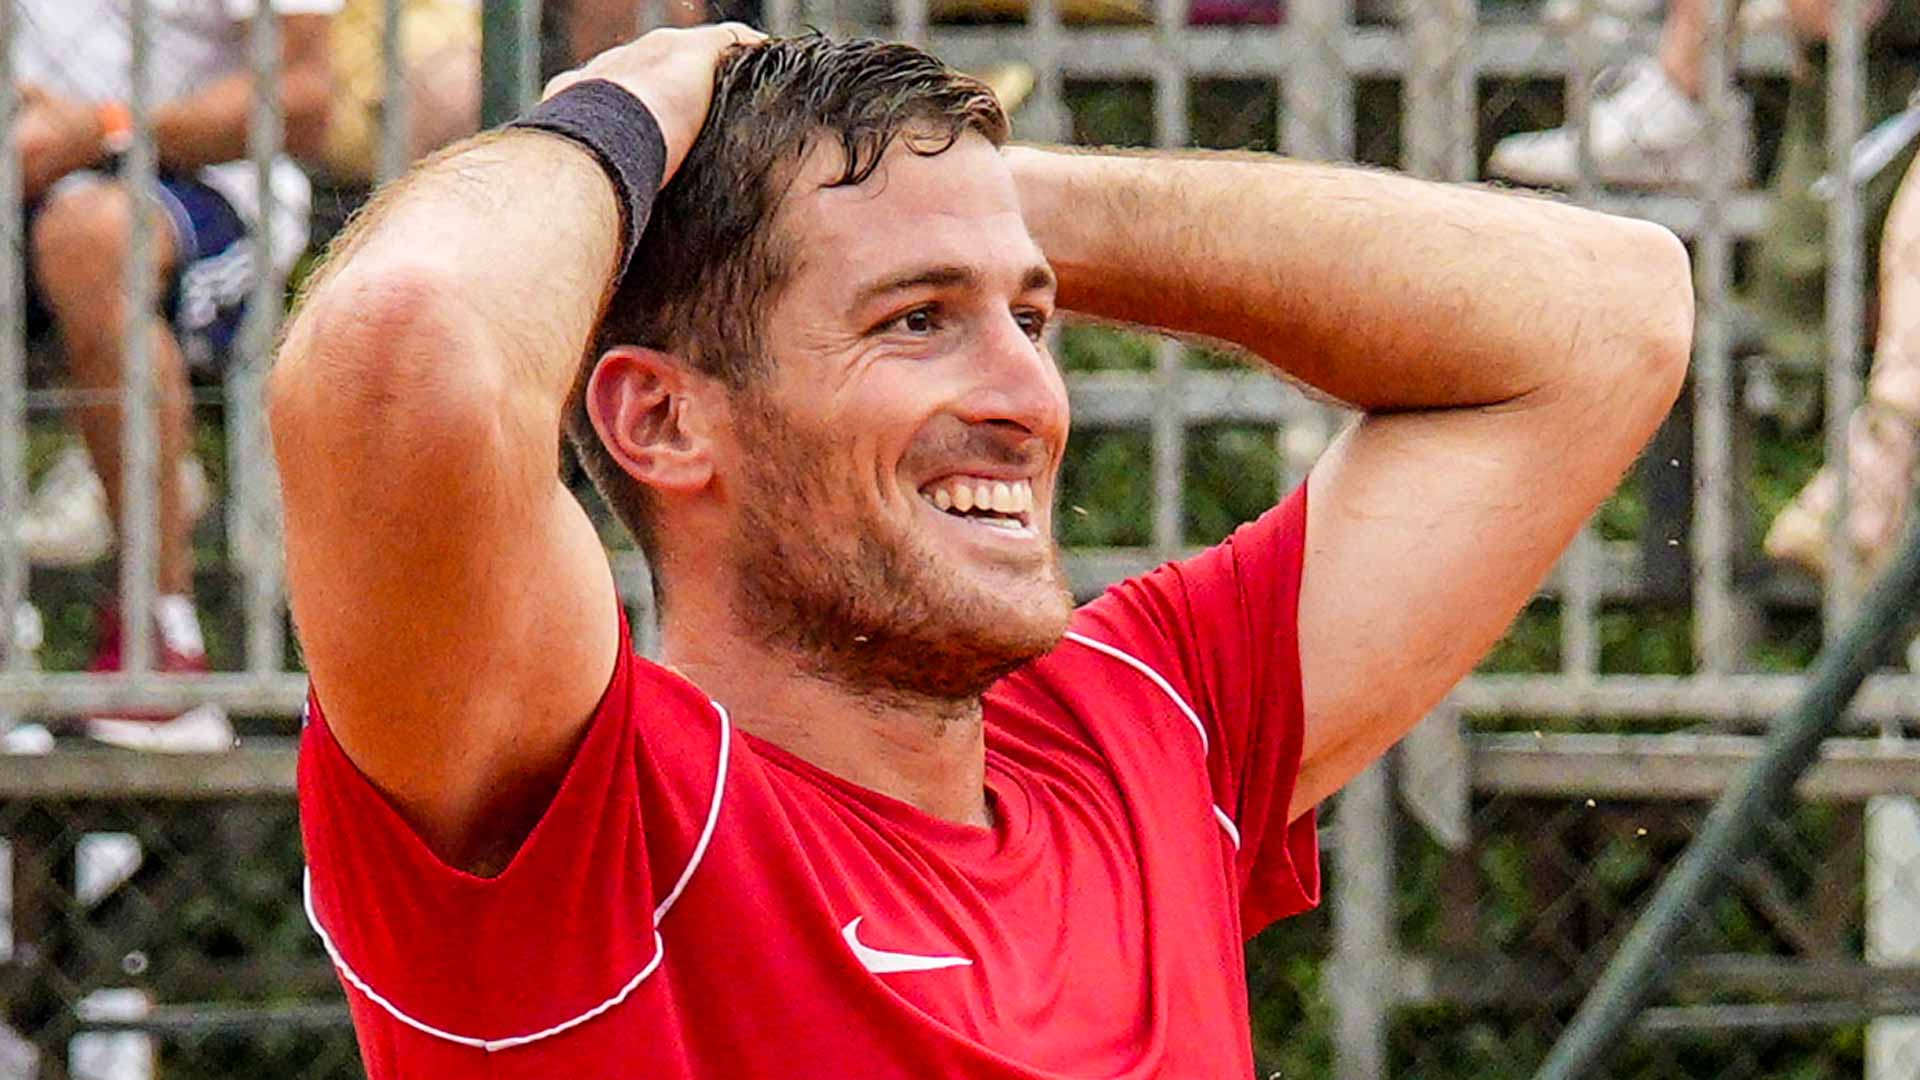 Federico Agustin Gomez celebrates winning the Challenger 75 event in Milan, Italy.